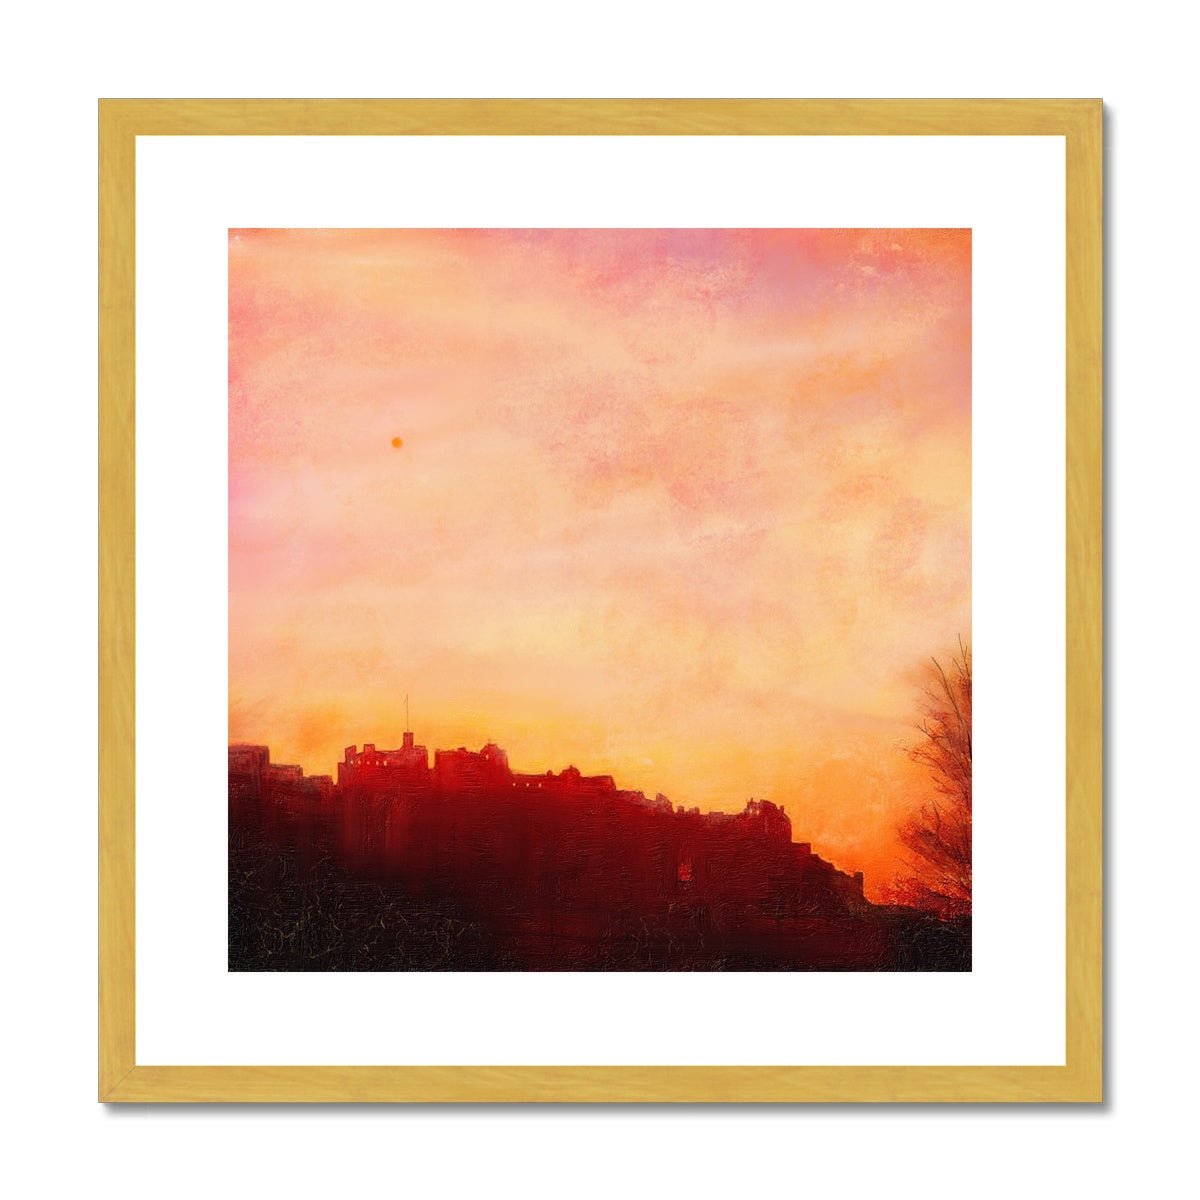 Edinburgh Castle Sunset Painting | Antique Framed & Mounted Prints From Scotland-Antique Framed & Mounted Prints-Historic & Iconic Scotland Art Gallery-20"x20"-Gold Frame-Paintings, Prints, Homeware, Art Gifts From Scotland By Scottish Artist Kevin Hunter